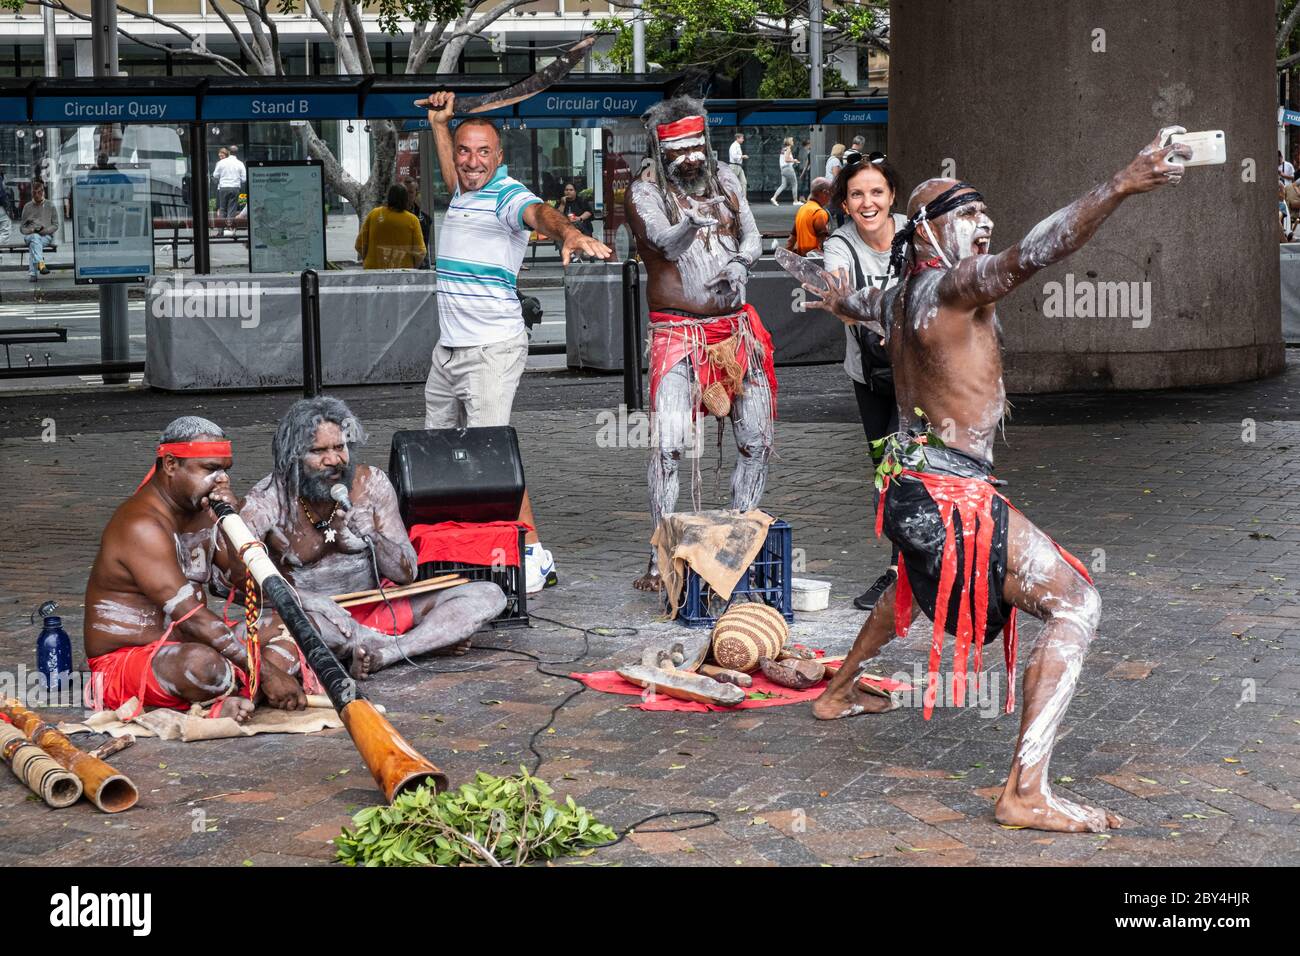 Tourists posing for a photo with aboriginal street performers, Circular Quay, Sydney, New South Wales, Australia Stock Photo